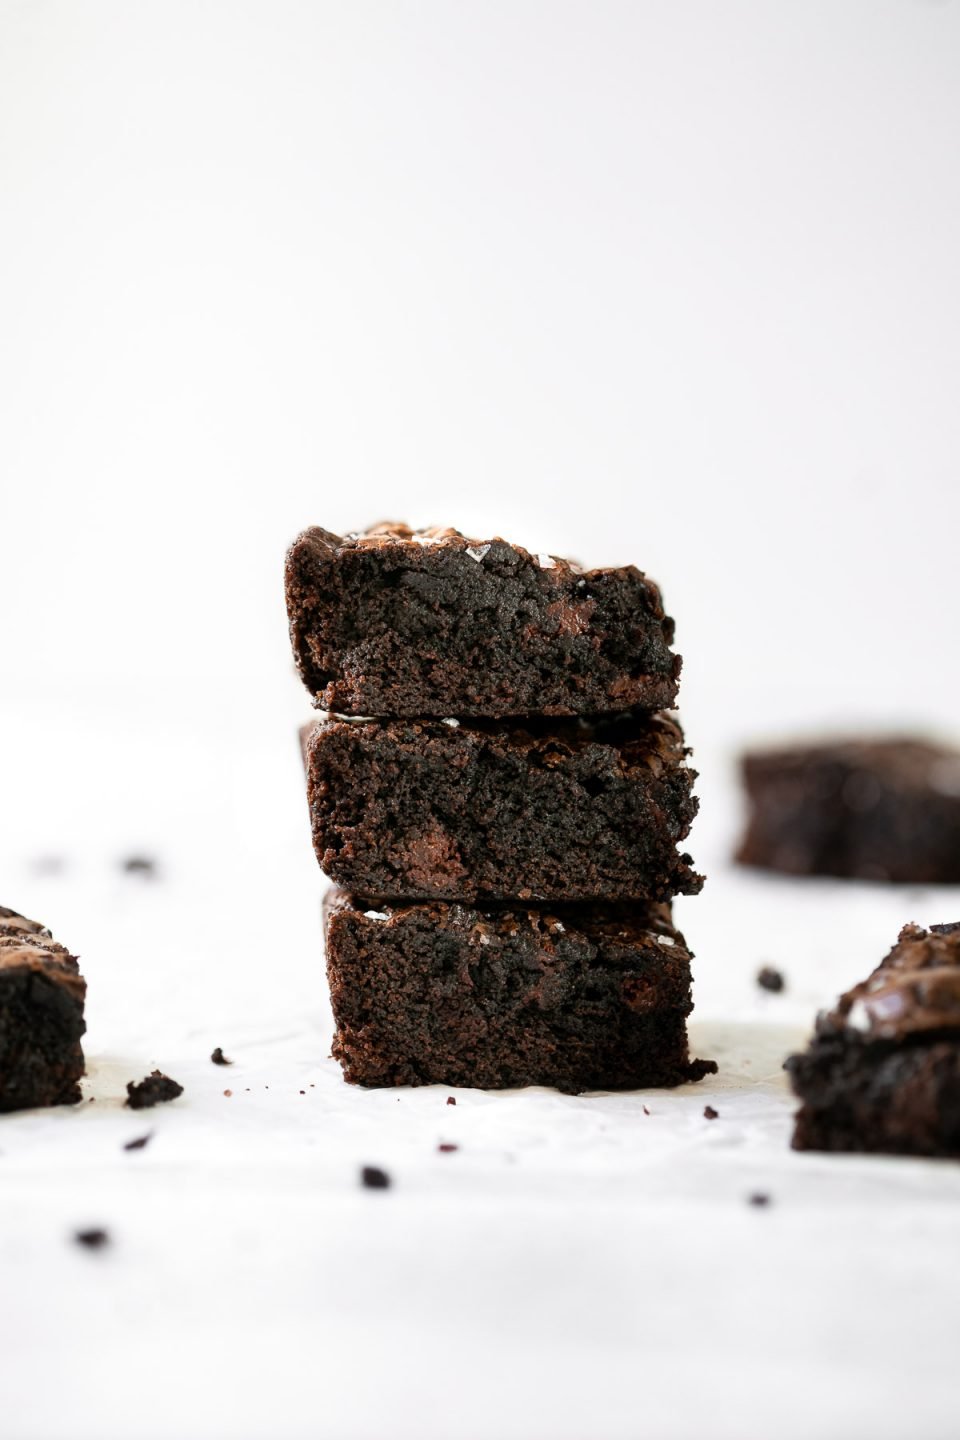 A side angle shot of a stack of 3 fudgy lazy girl brownies topped with flaky sea salt atop a crumpled piece of parchment paper. Single set on the same surface brownies surround the stack.